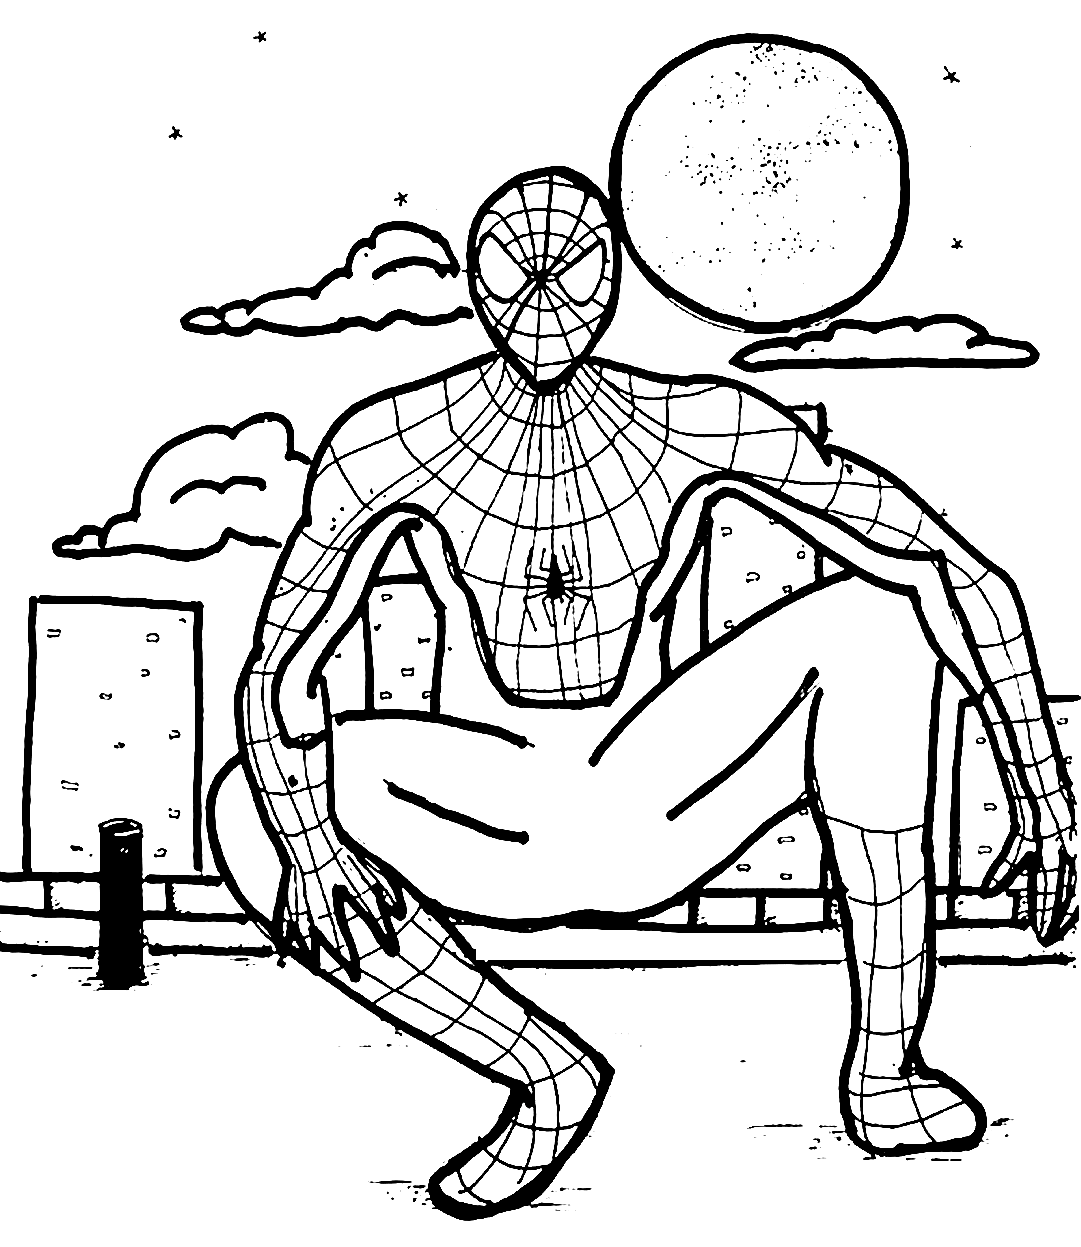 spiderman coloring page